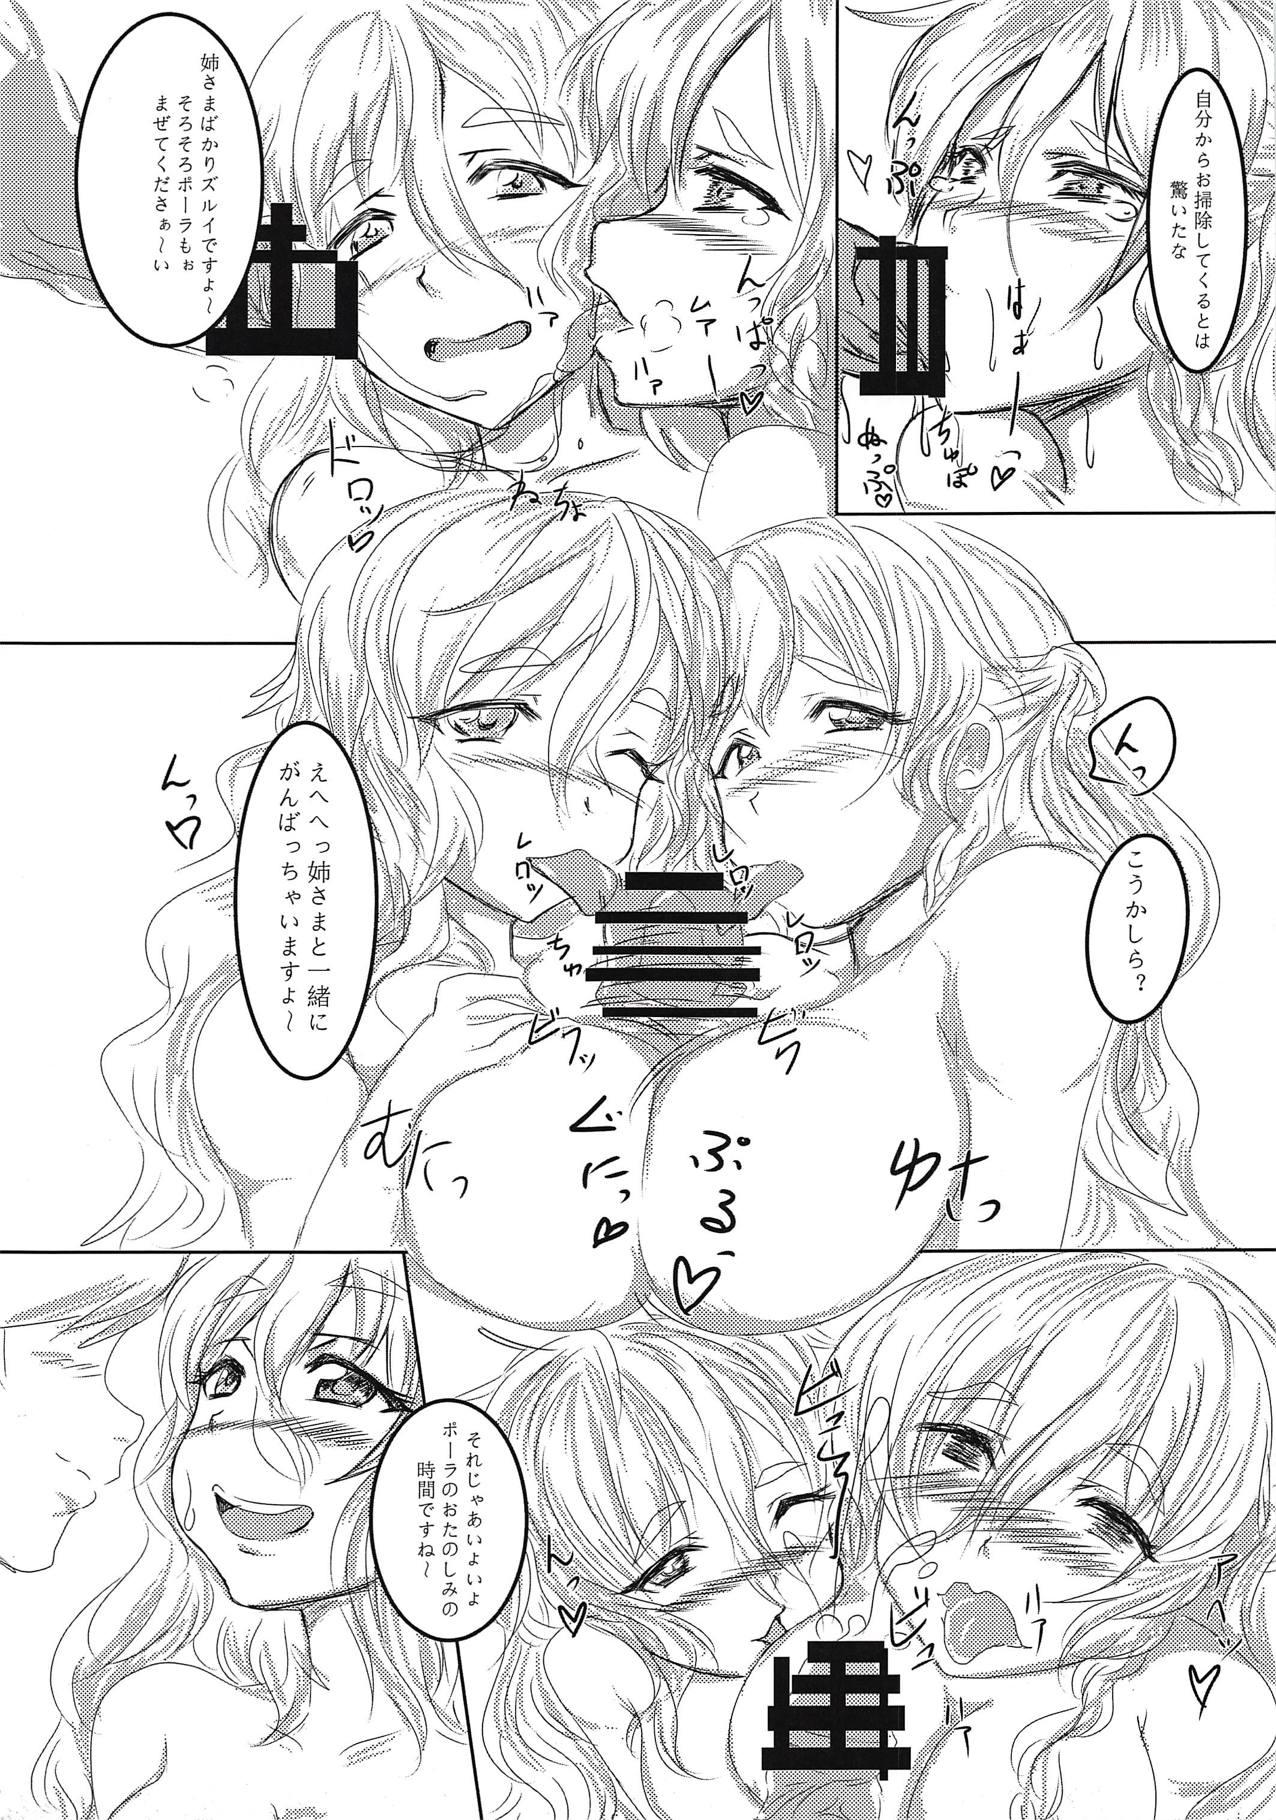 4some ITACOM - Kantai collection Hot Women Having Sex - Page 6